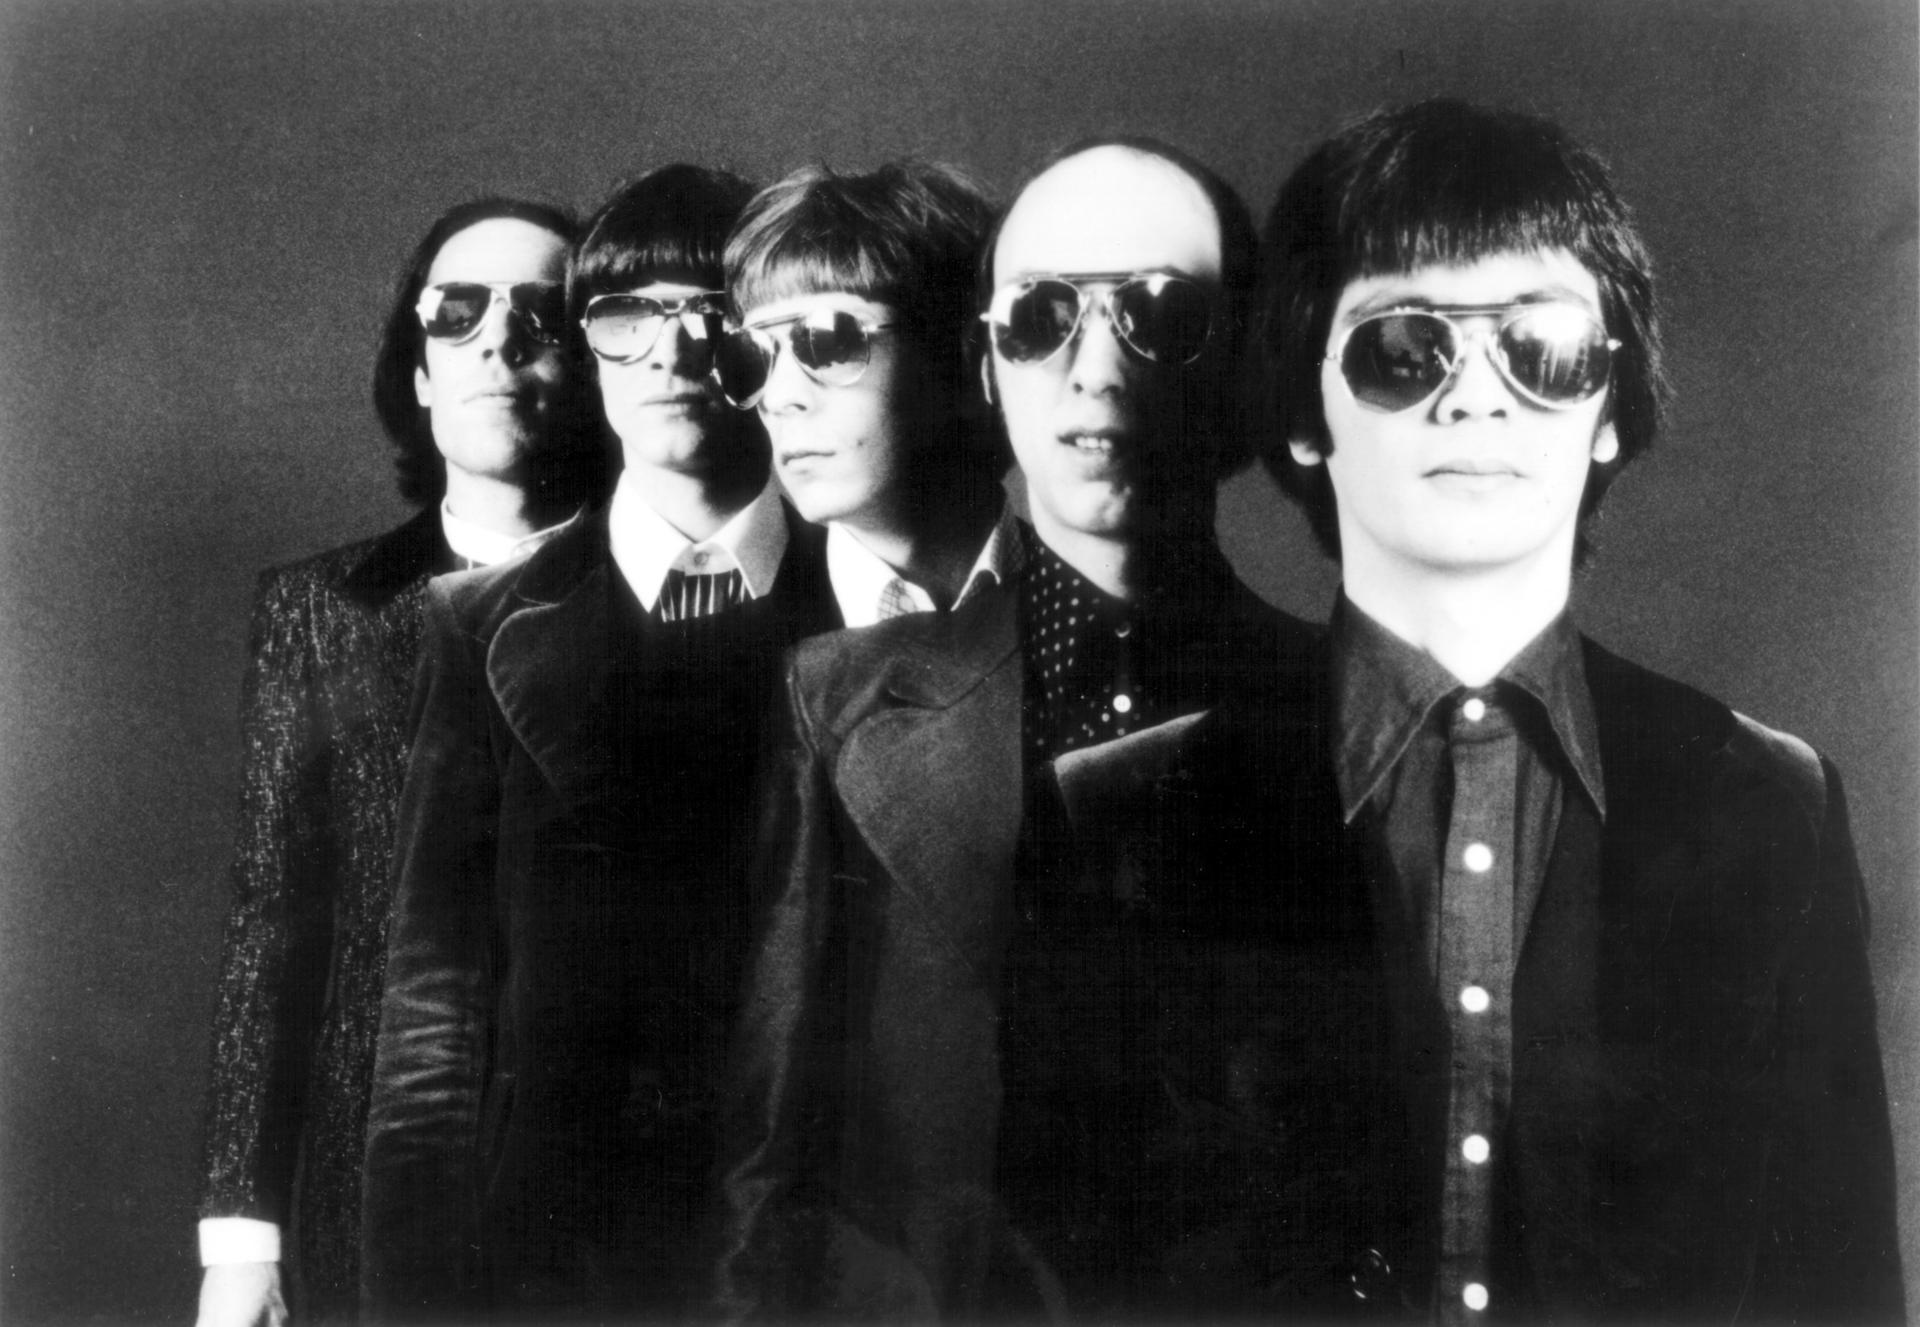 The Flamin' Groovies are covering more ground than ever before.